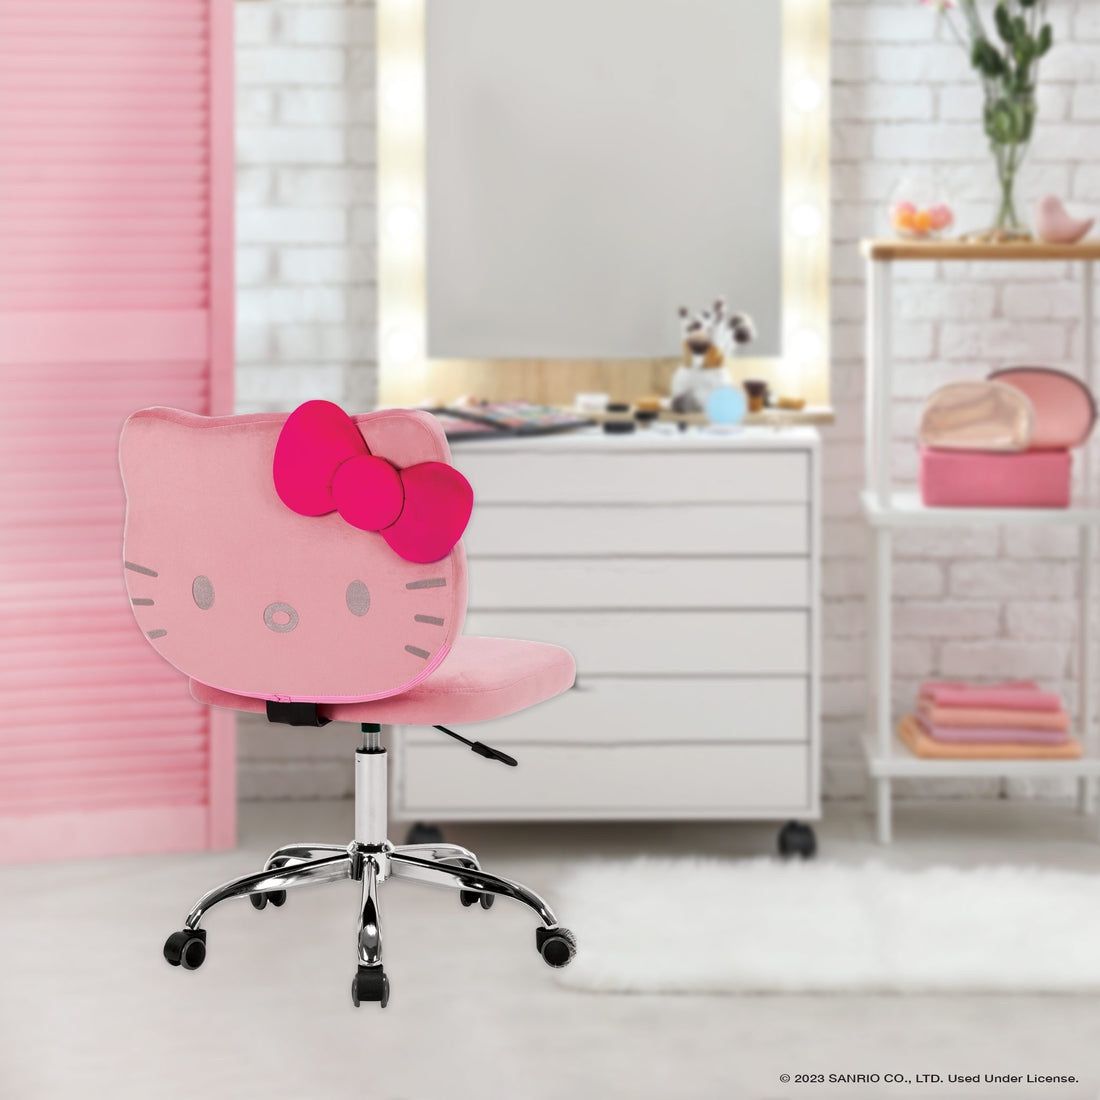 Hello Kitty Swivel Chairs Pink, White, Black In Stock 😍😍